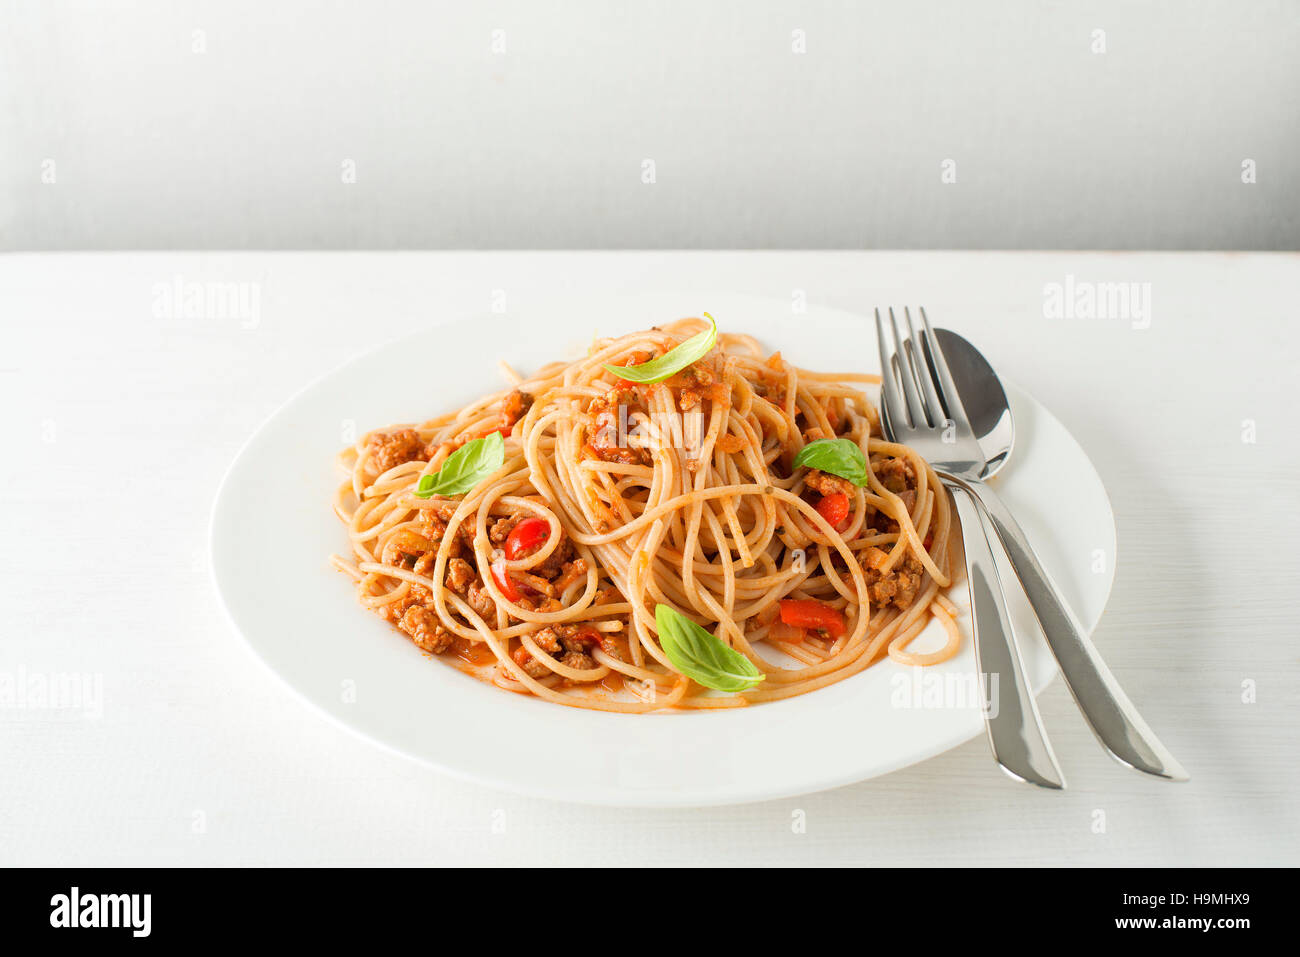 Spaghetti with Bolognese sauce and basil served on a white plate Stock Photo